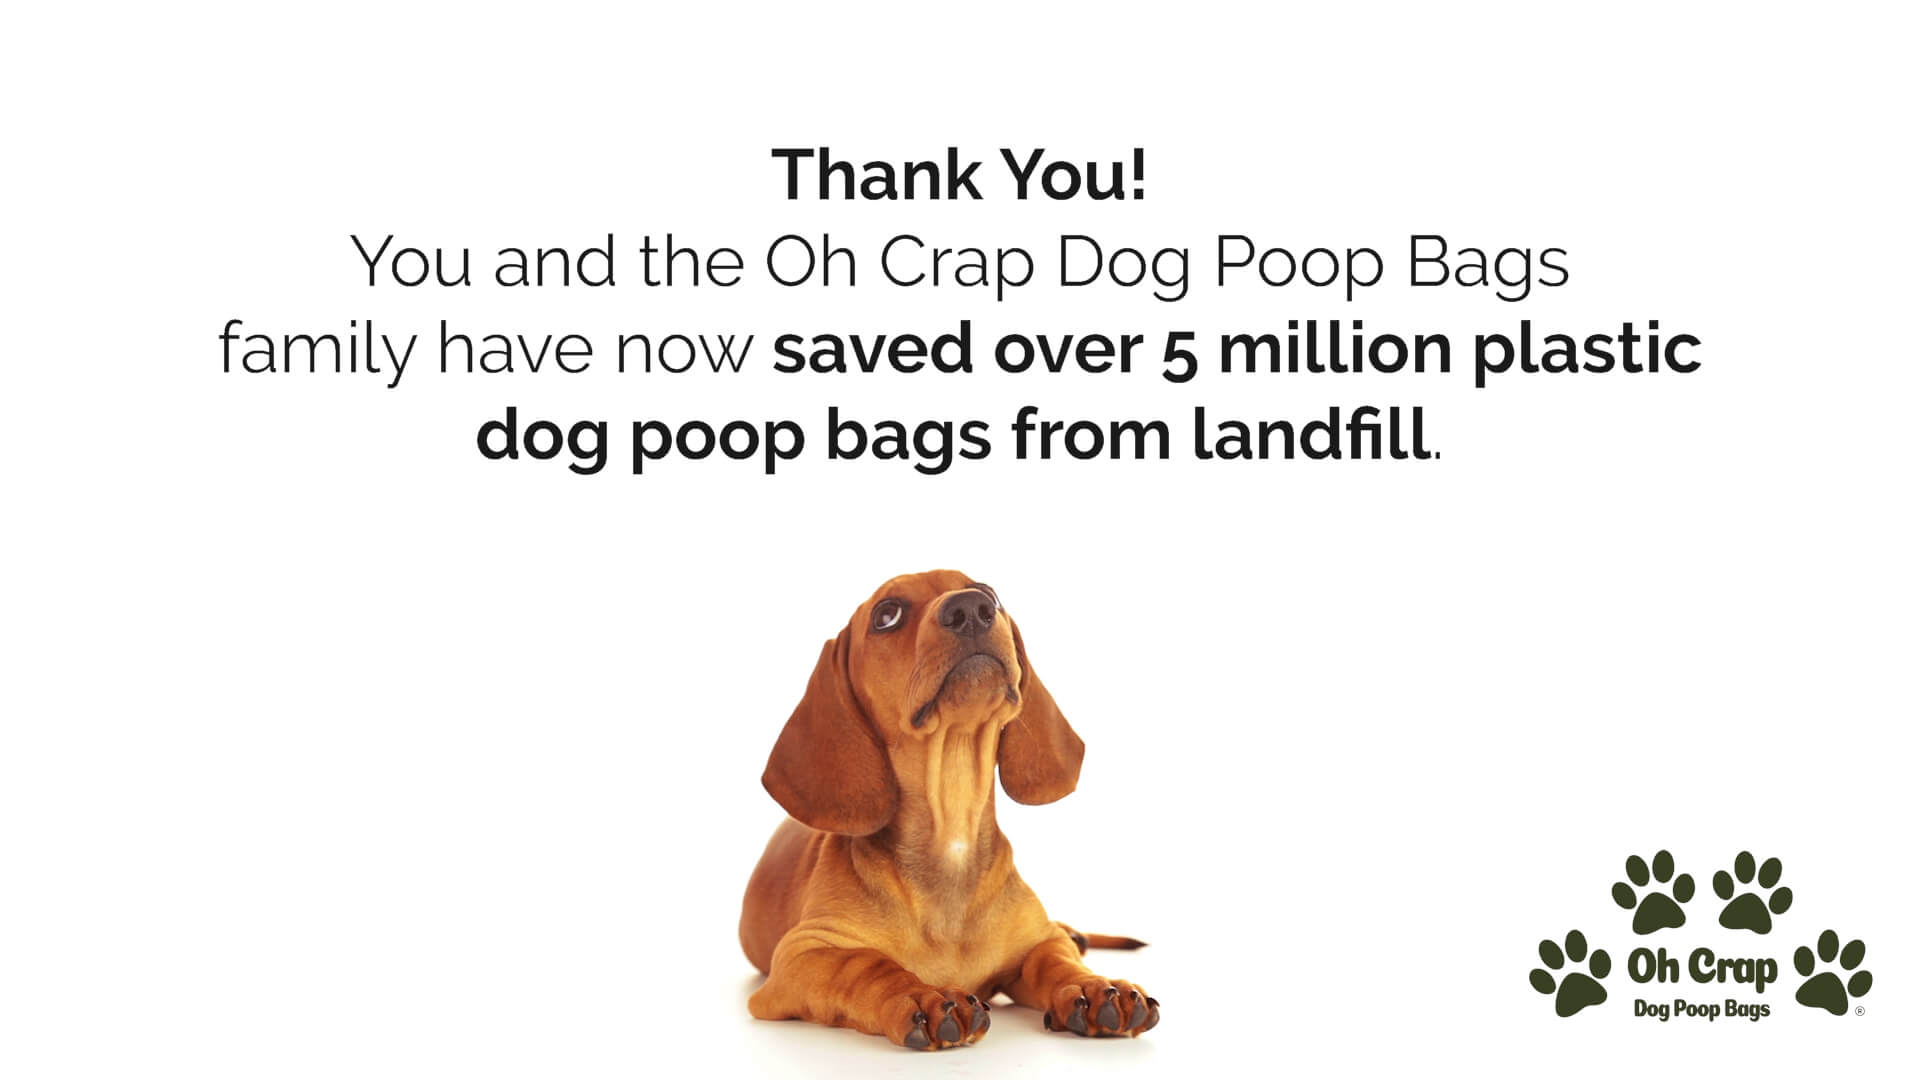 Image that says thank you for being part of the Oh Crap family who have now saved 5 million bags from landfill.